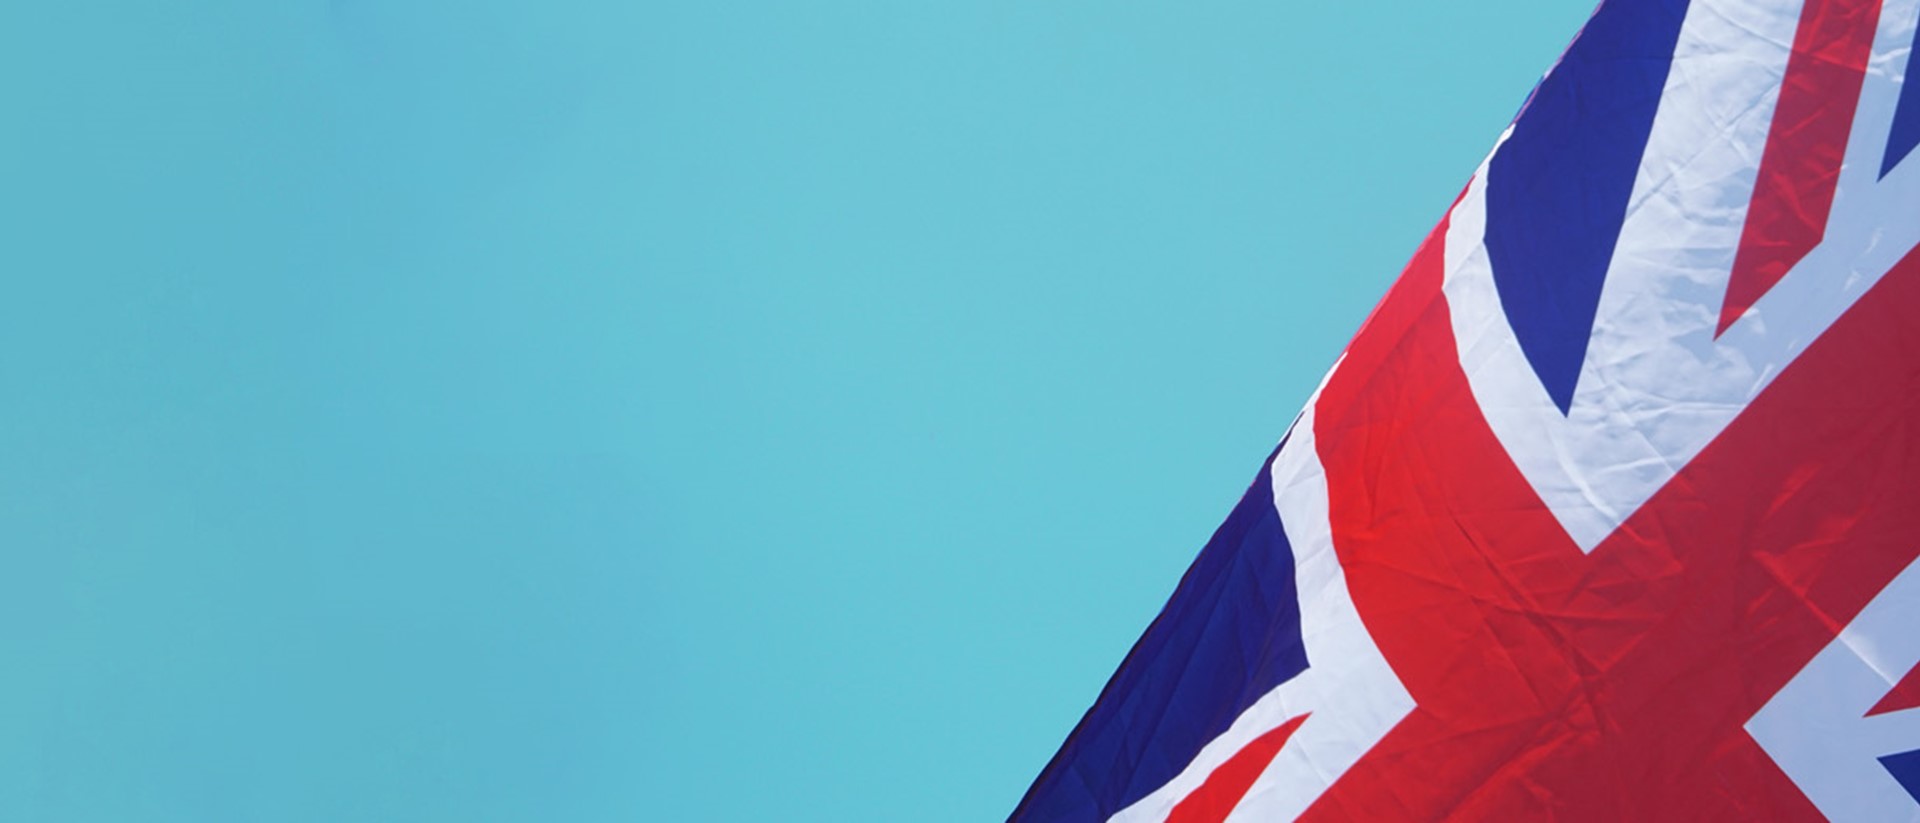 Image of a union jack flag against a blue background